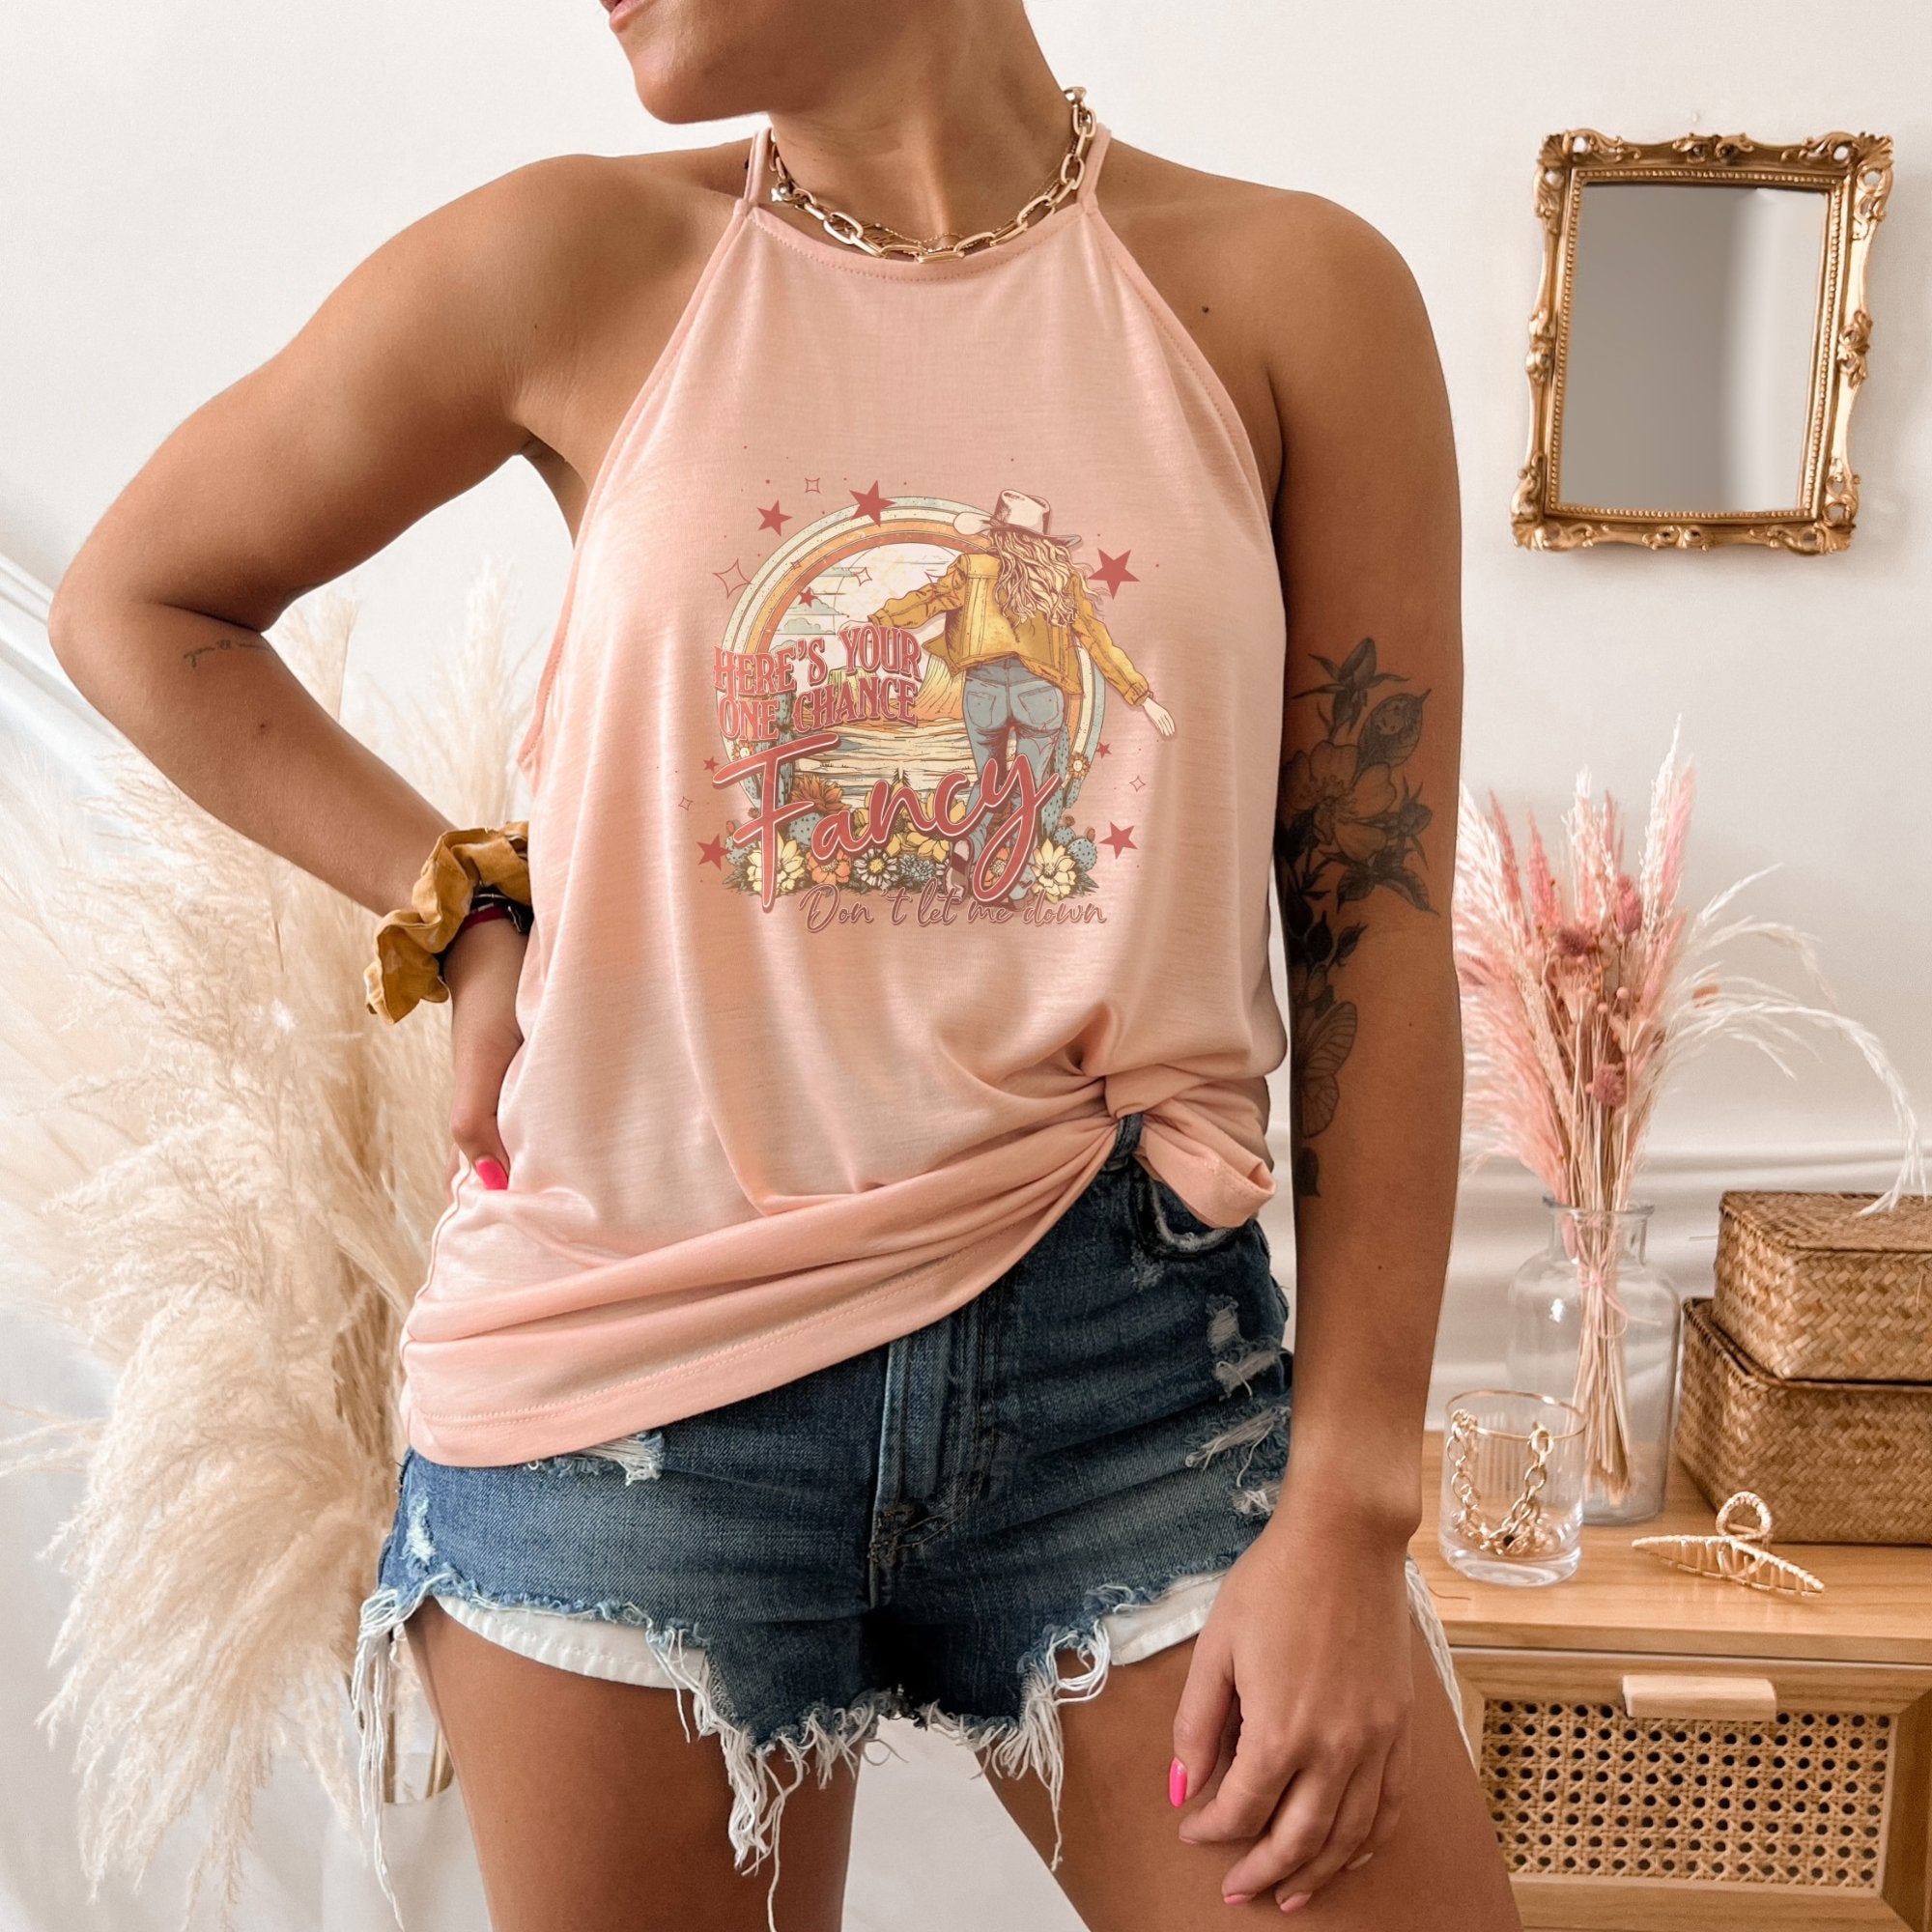 Here's Your One Chance Fancy Western Tank Top - Trendznmore